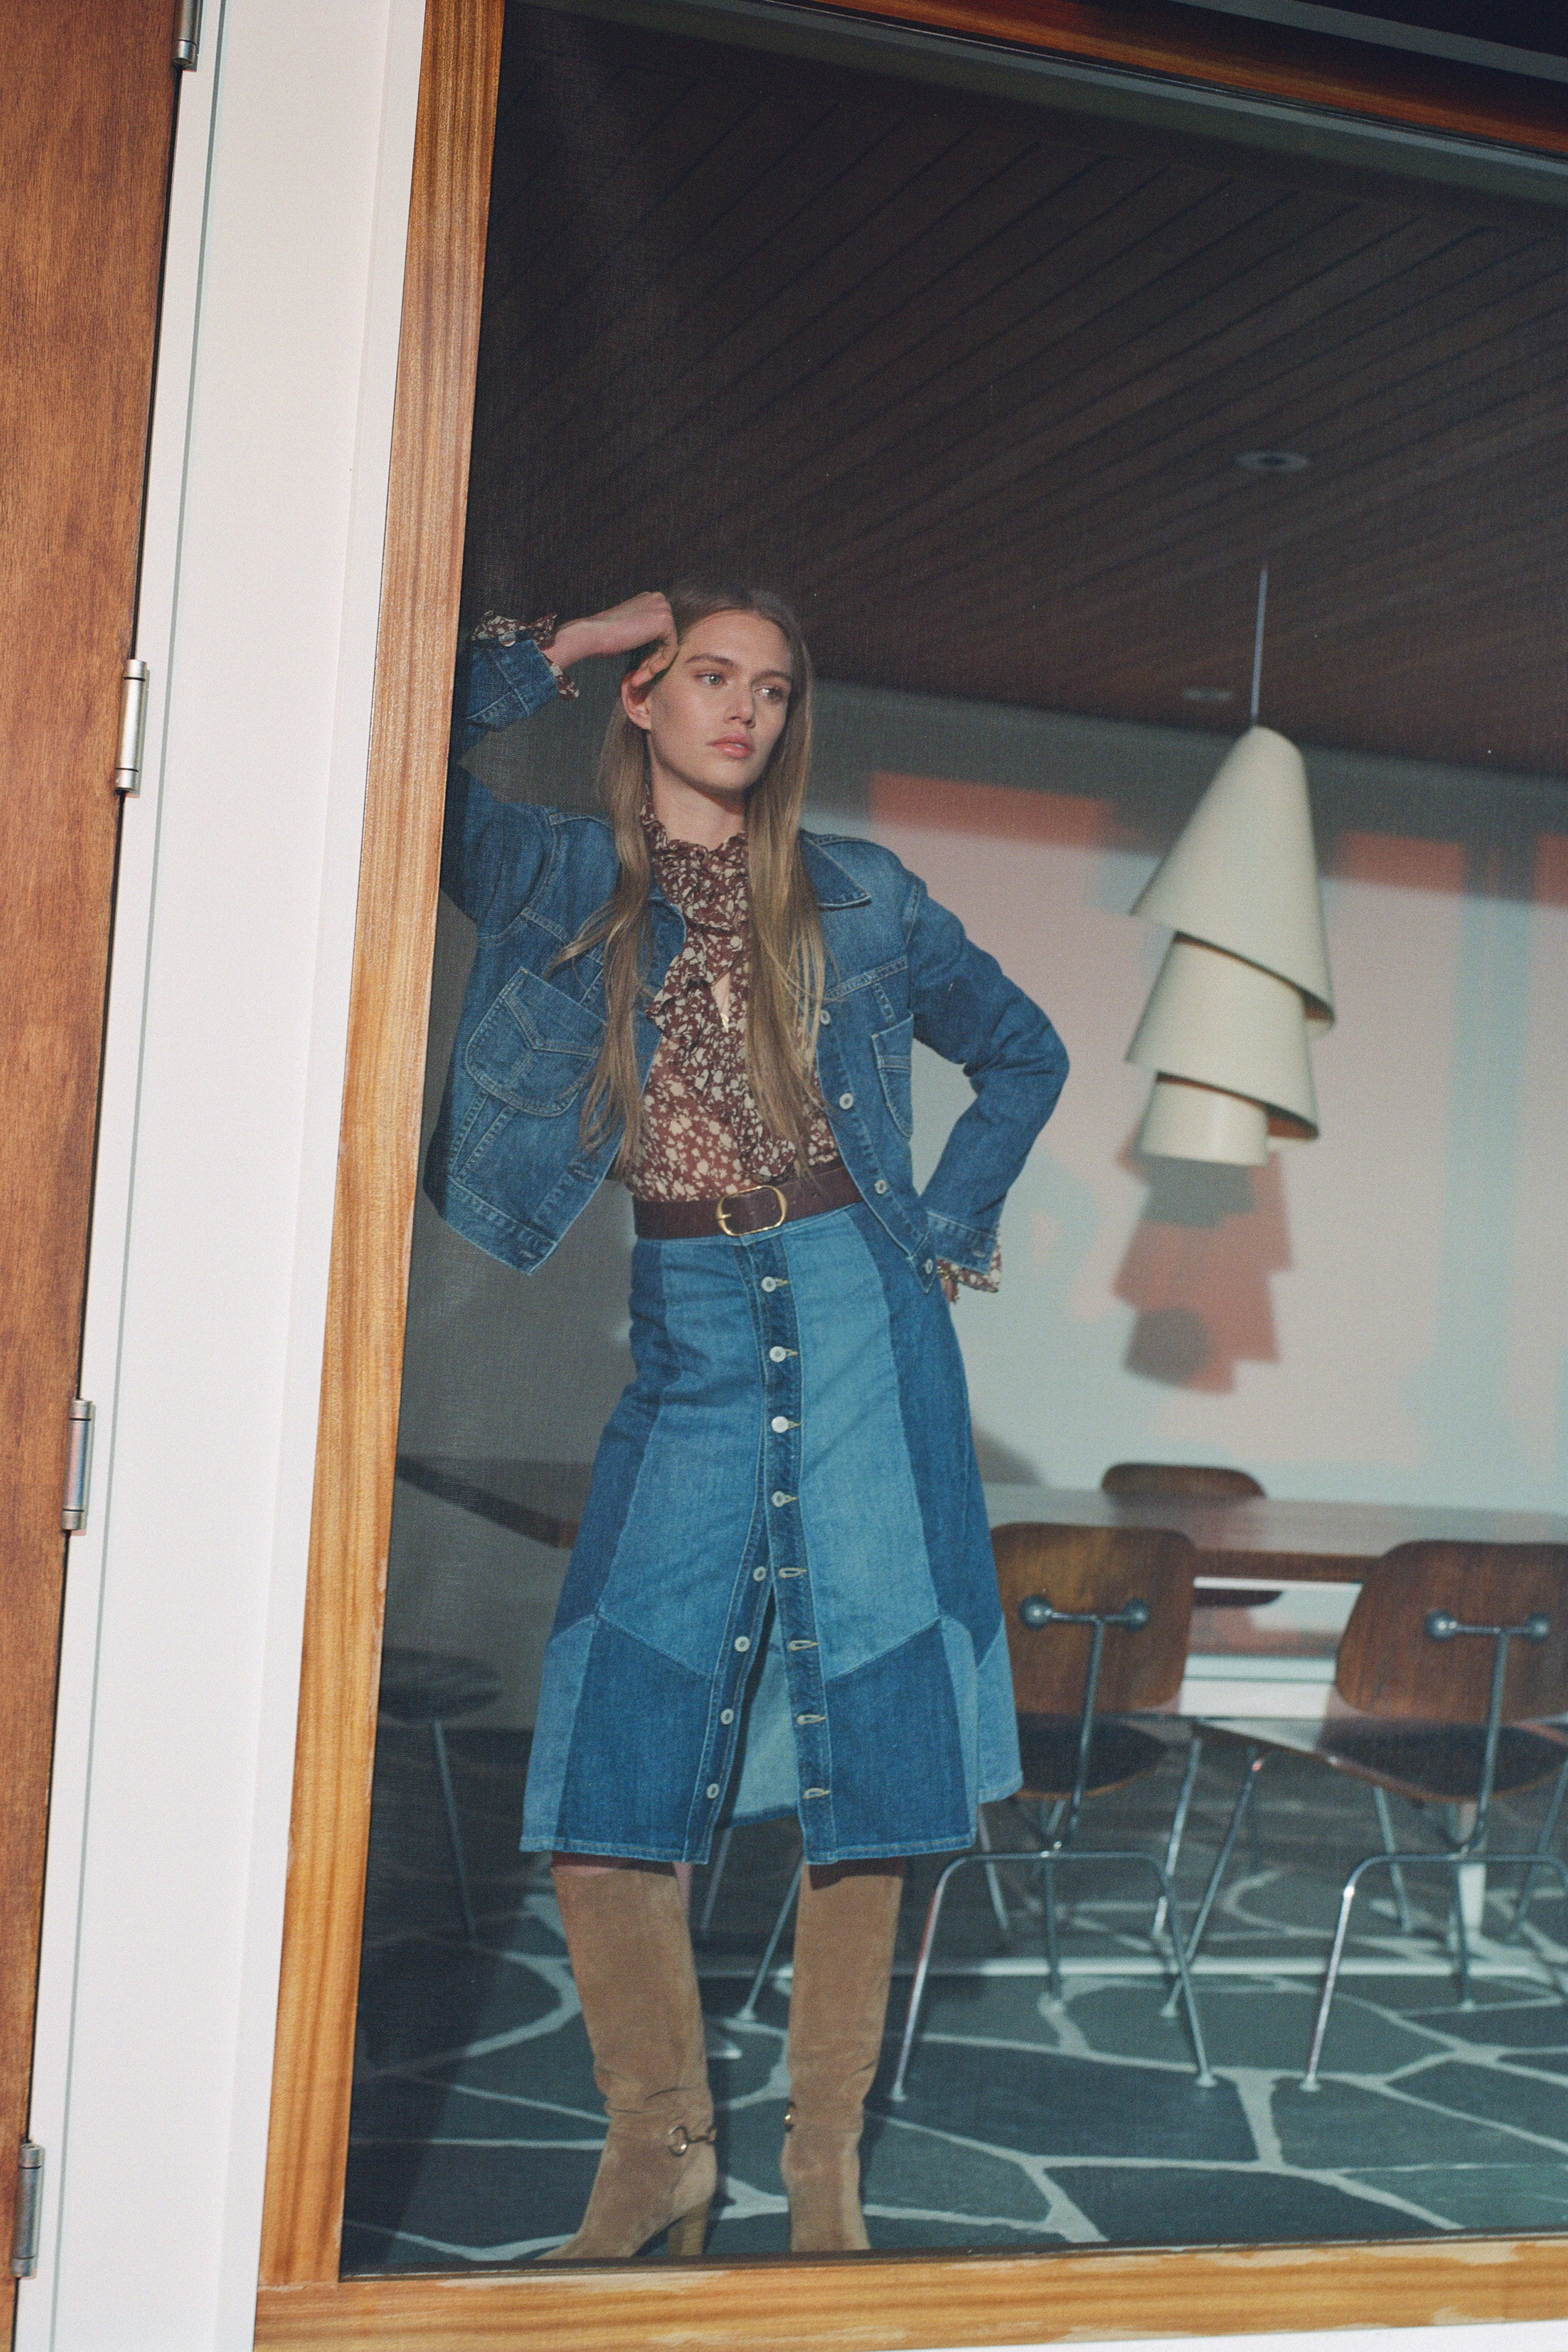 The 5 Key Denim Trends to Watch for Pre-Fall 21